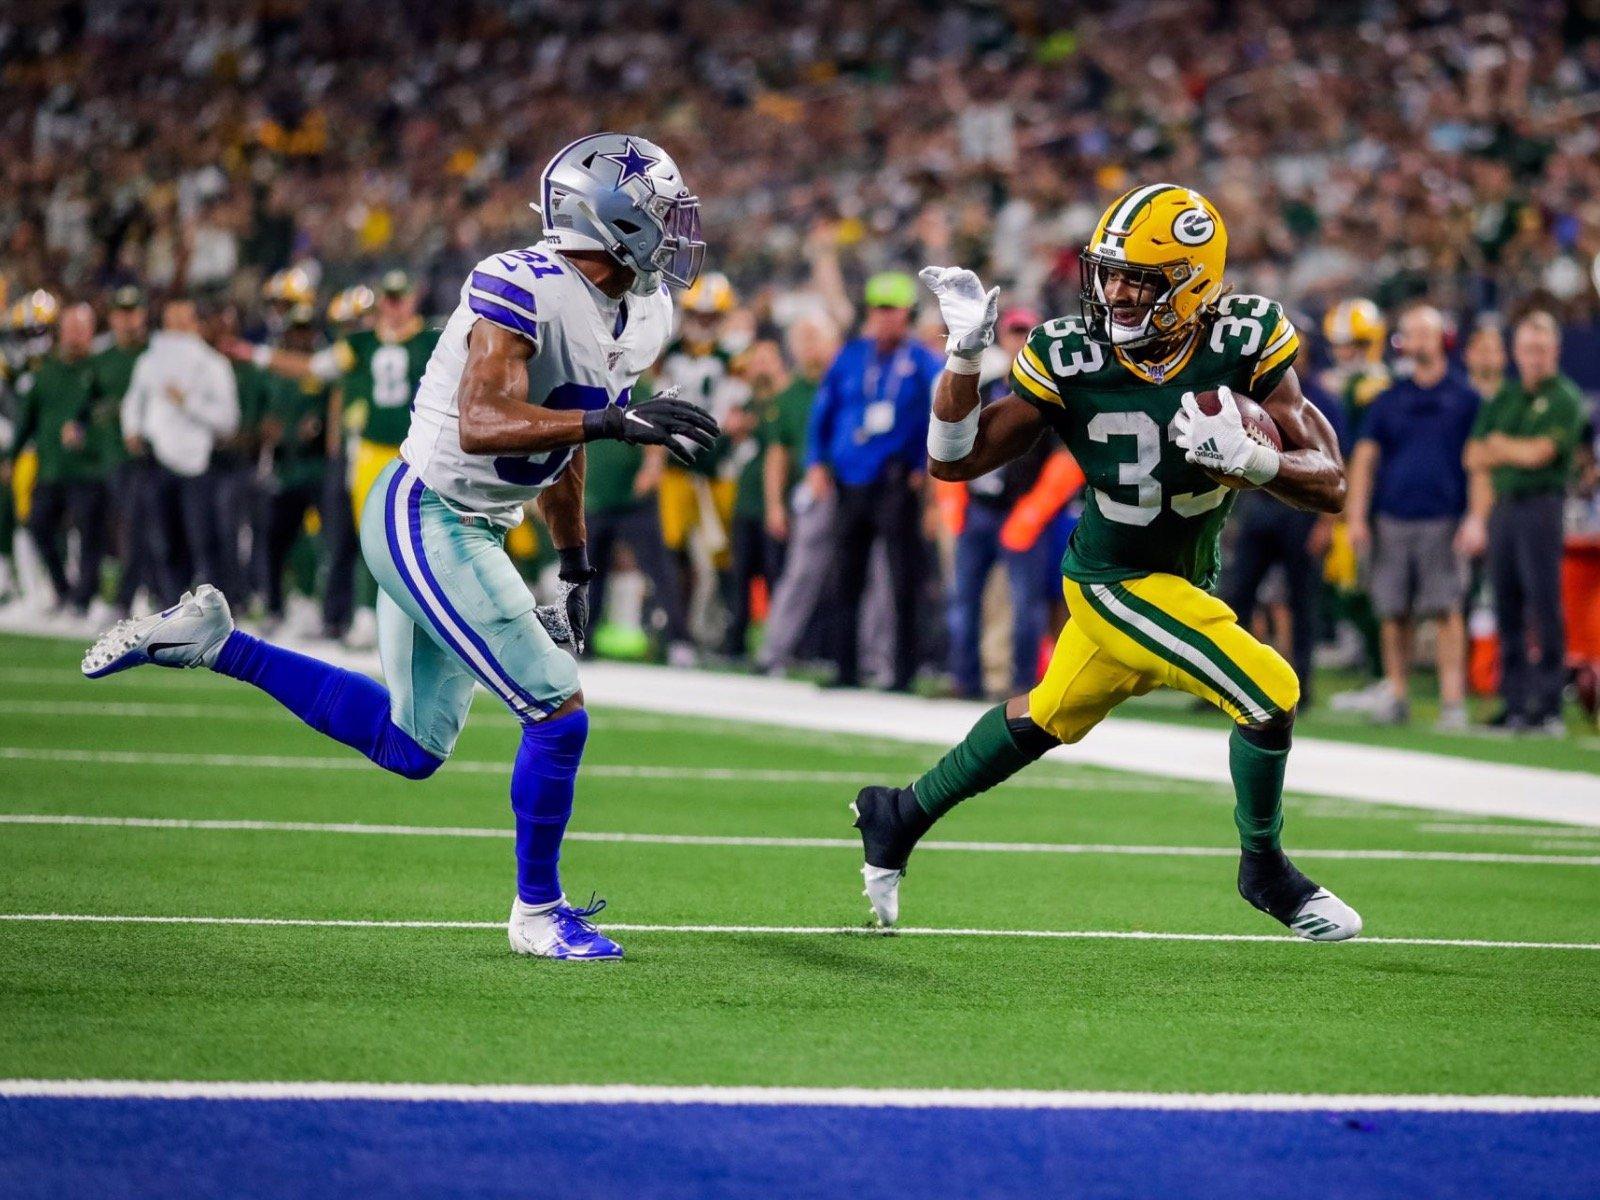 awesome image from the Packers' awesome win over